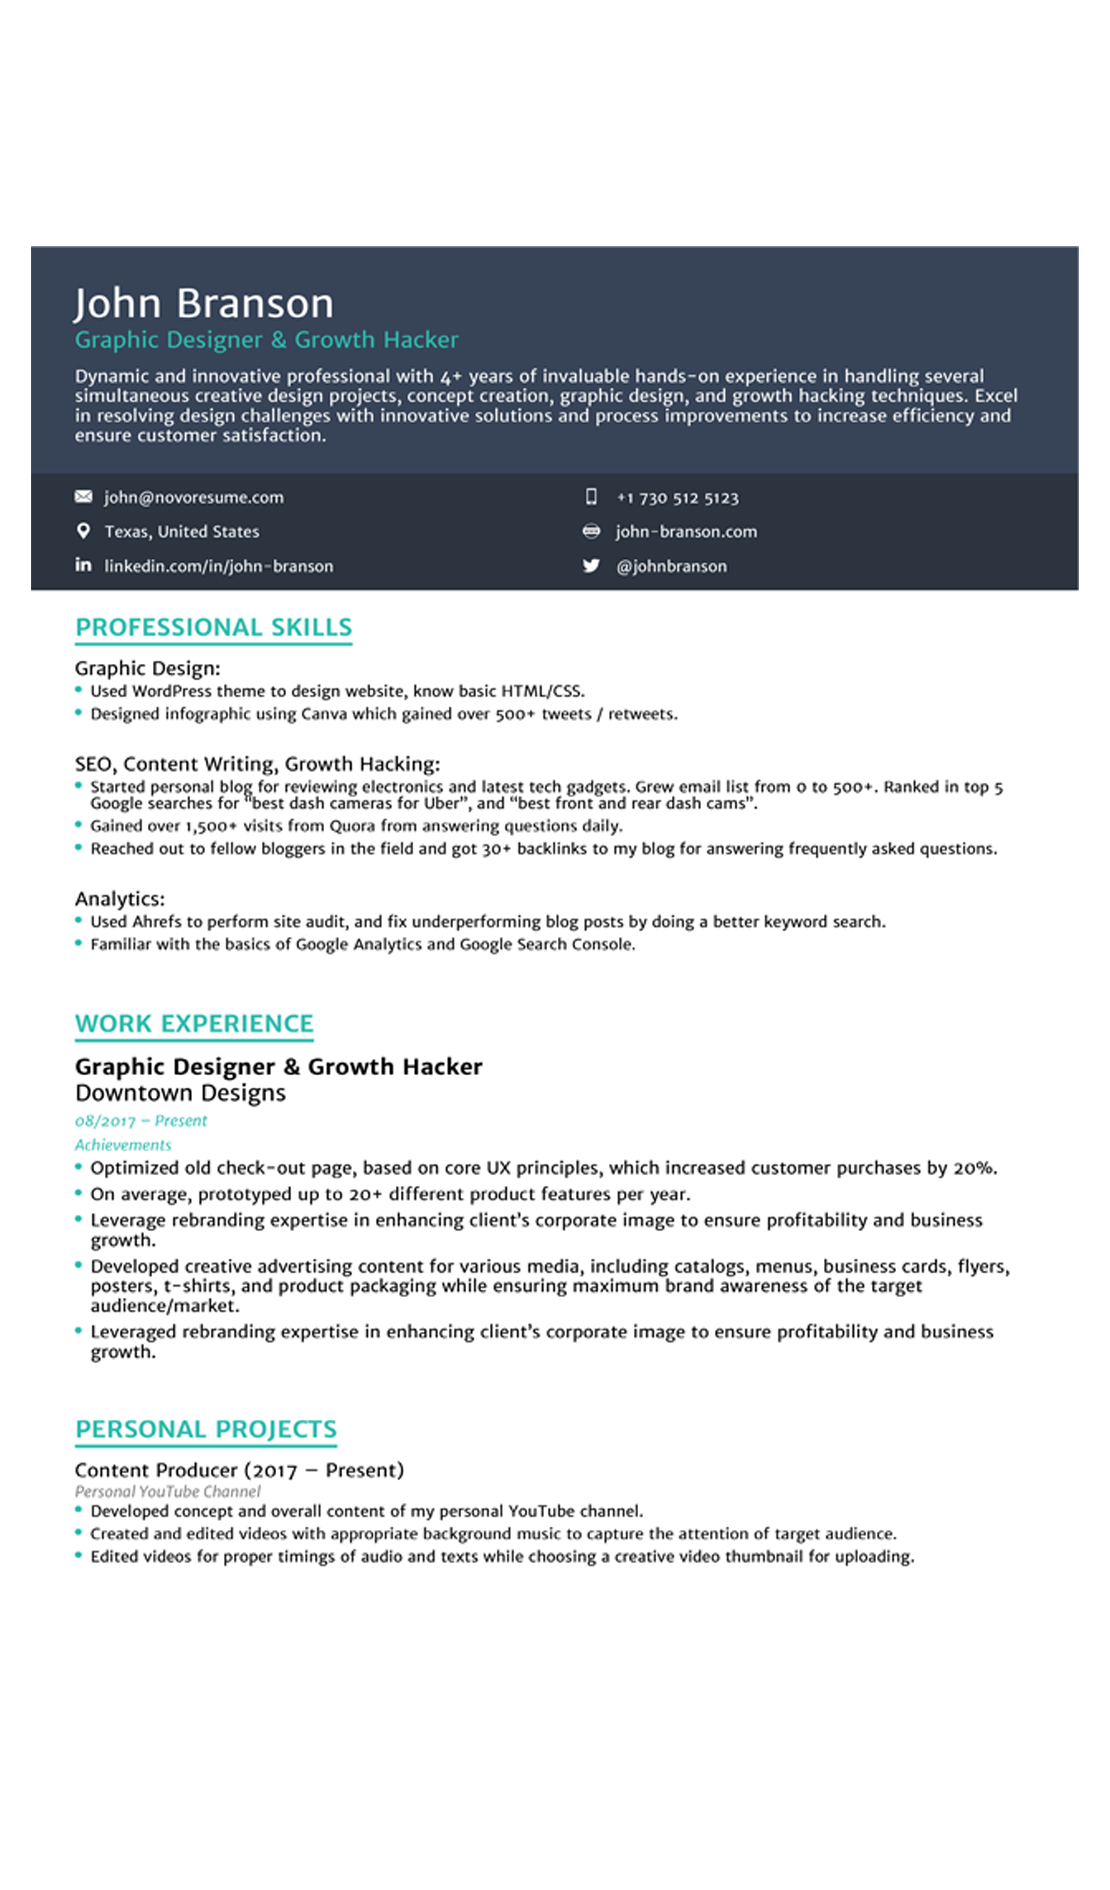 FREE Resume & Cover Letter Templates